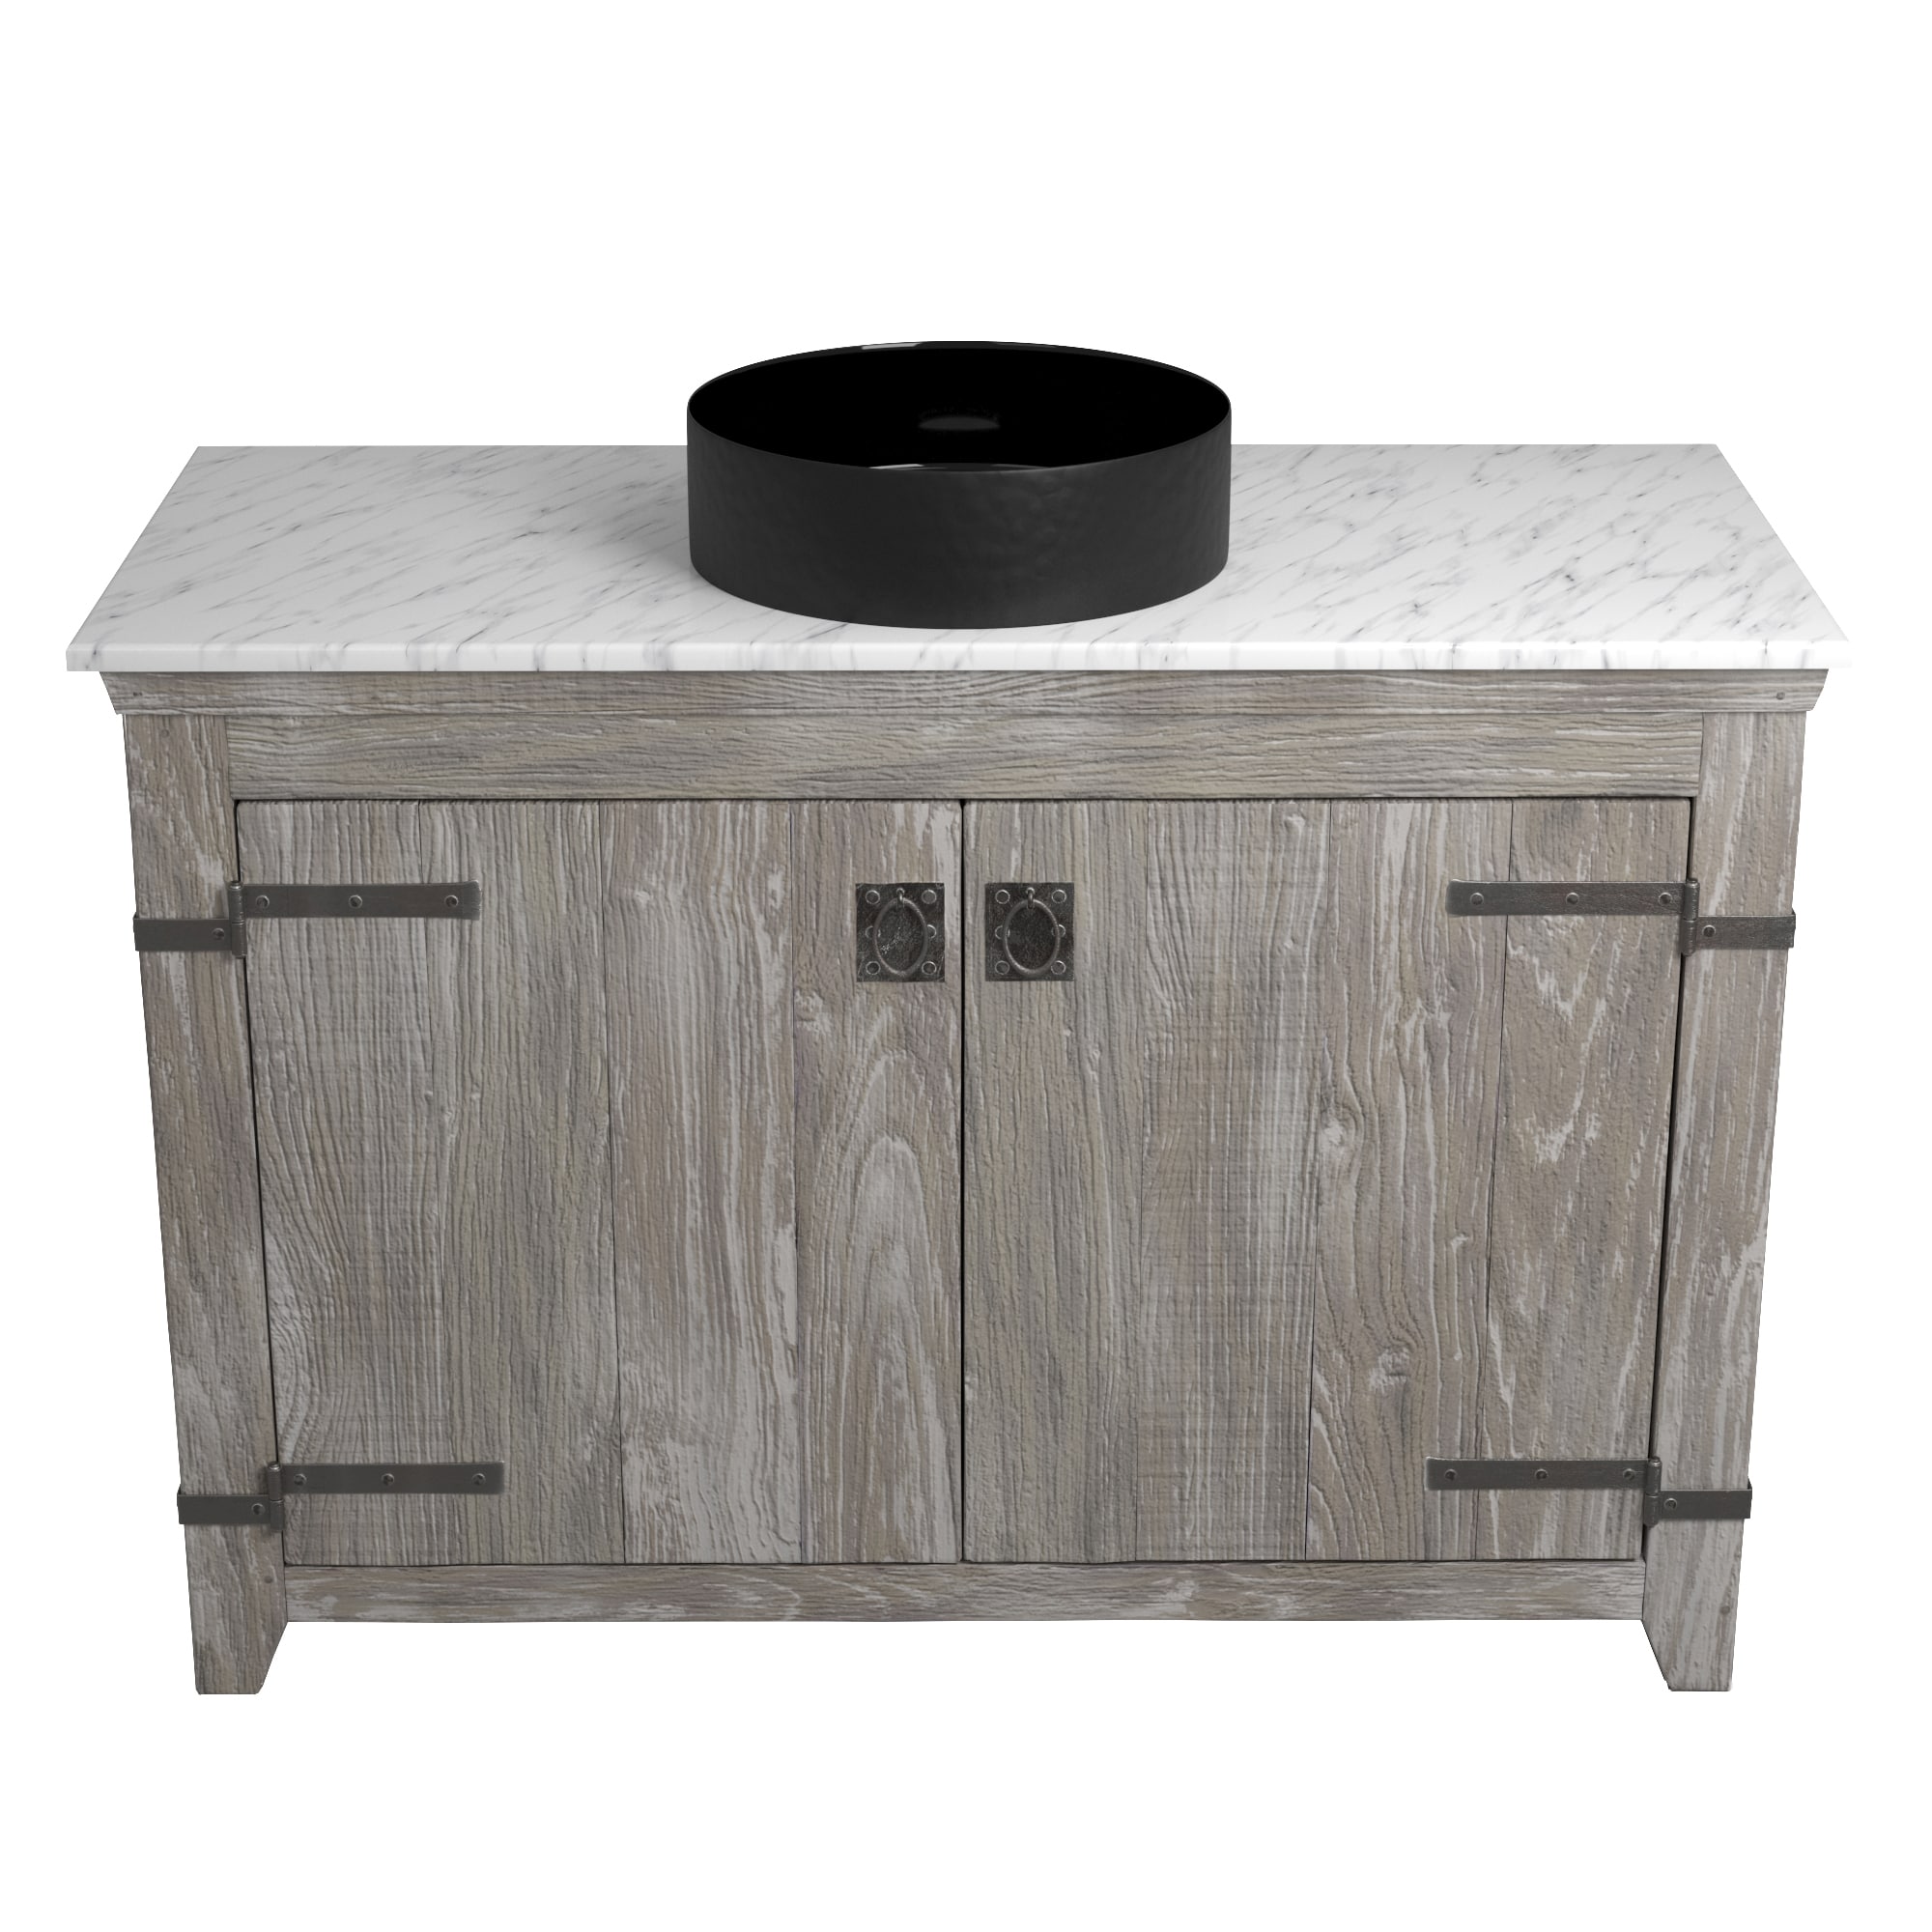 Native Trails 48" Americana Vanity in Driftwood with Carrara Marble Top and Positano in Abyss, No Faucet Hole, BND48-VB-CT-MG-048